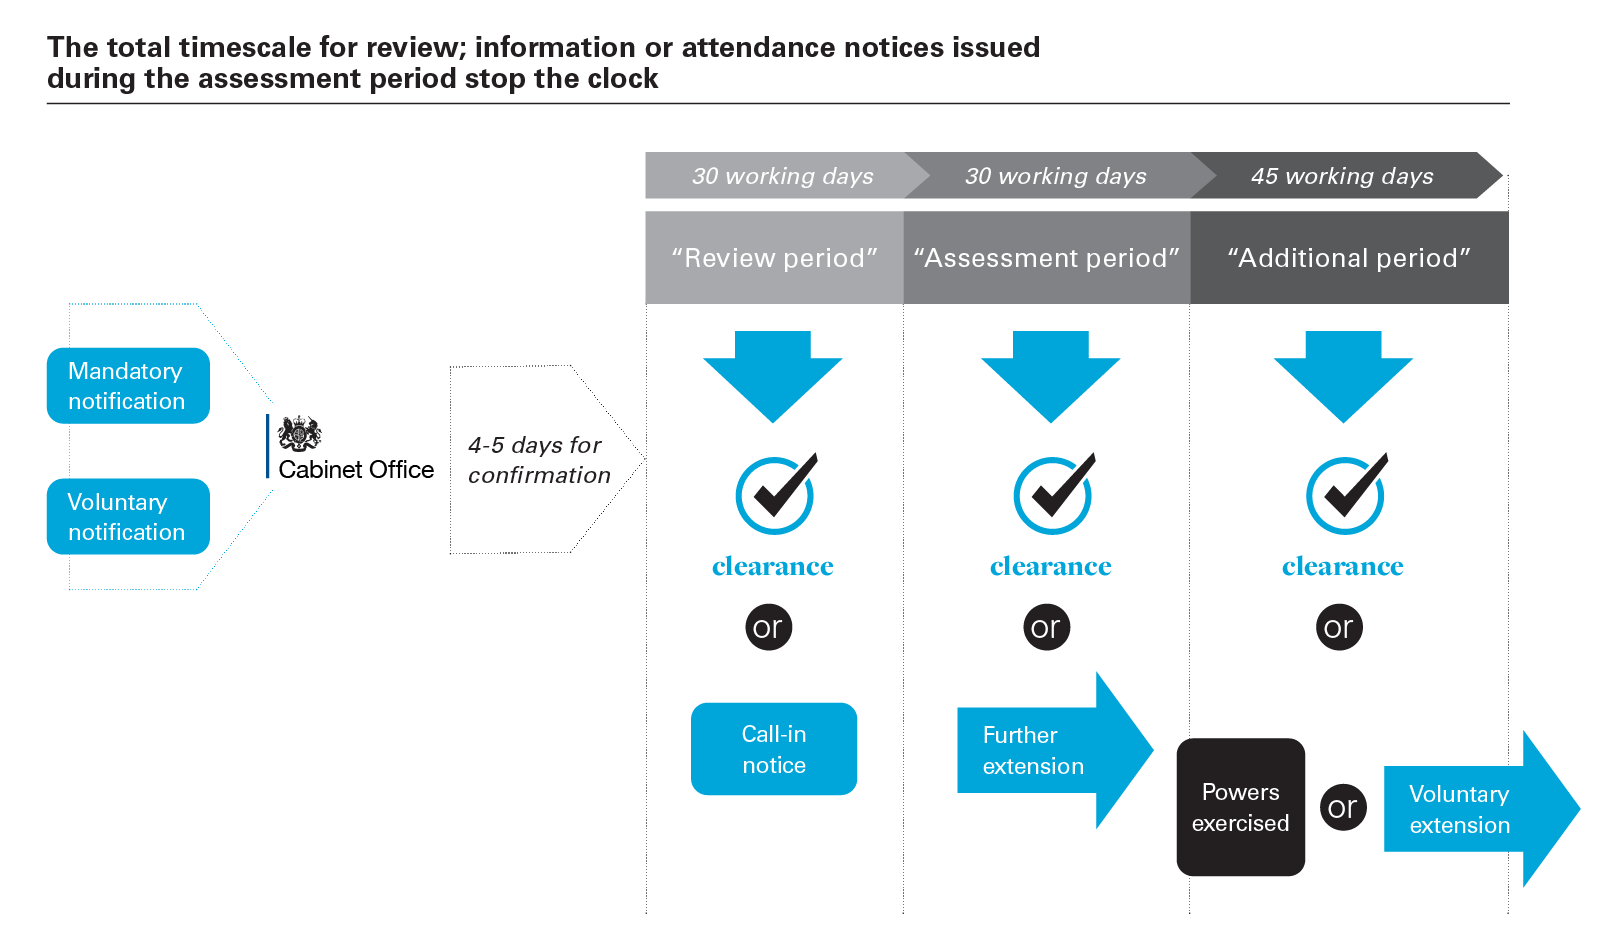 The total timescale for review; information or attendance notices issued during the assessment period stop the clock